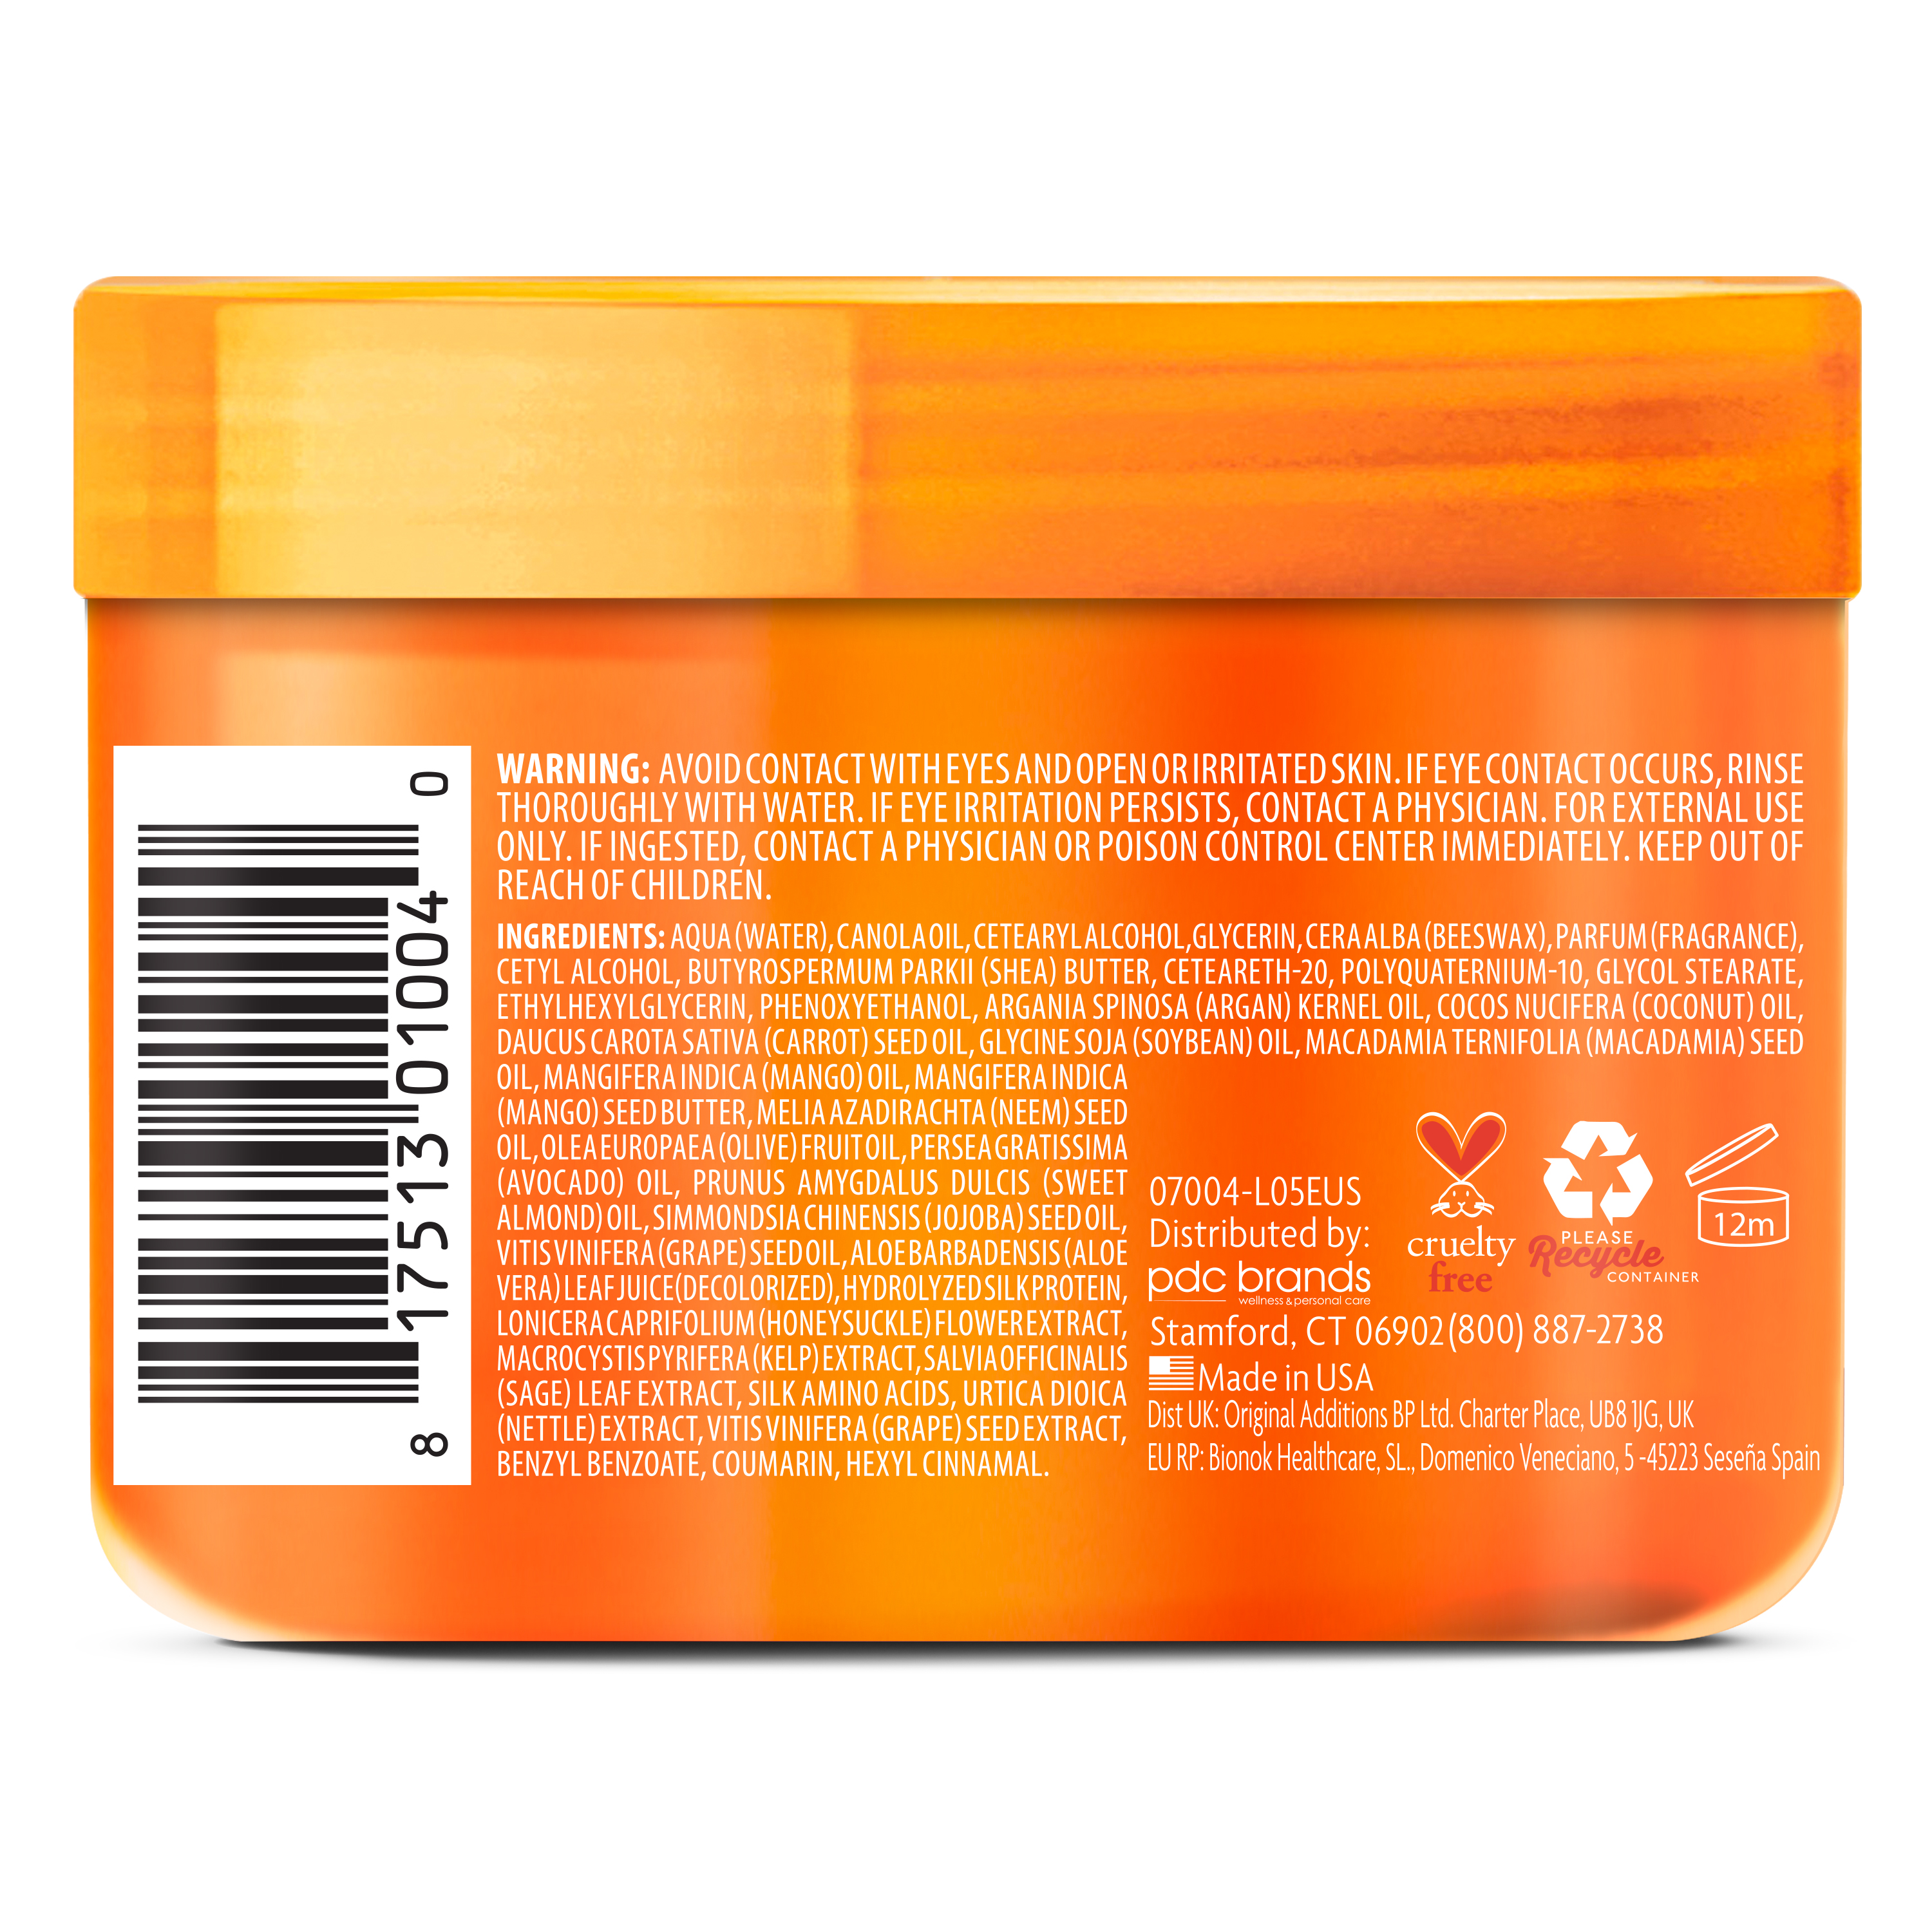 Cantu Deep Treatment Hair Masque with Shea Butter, 12 fl oz - image 9 of 10